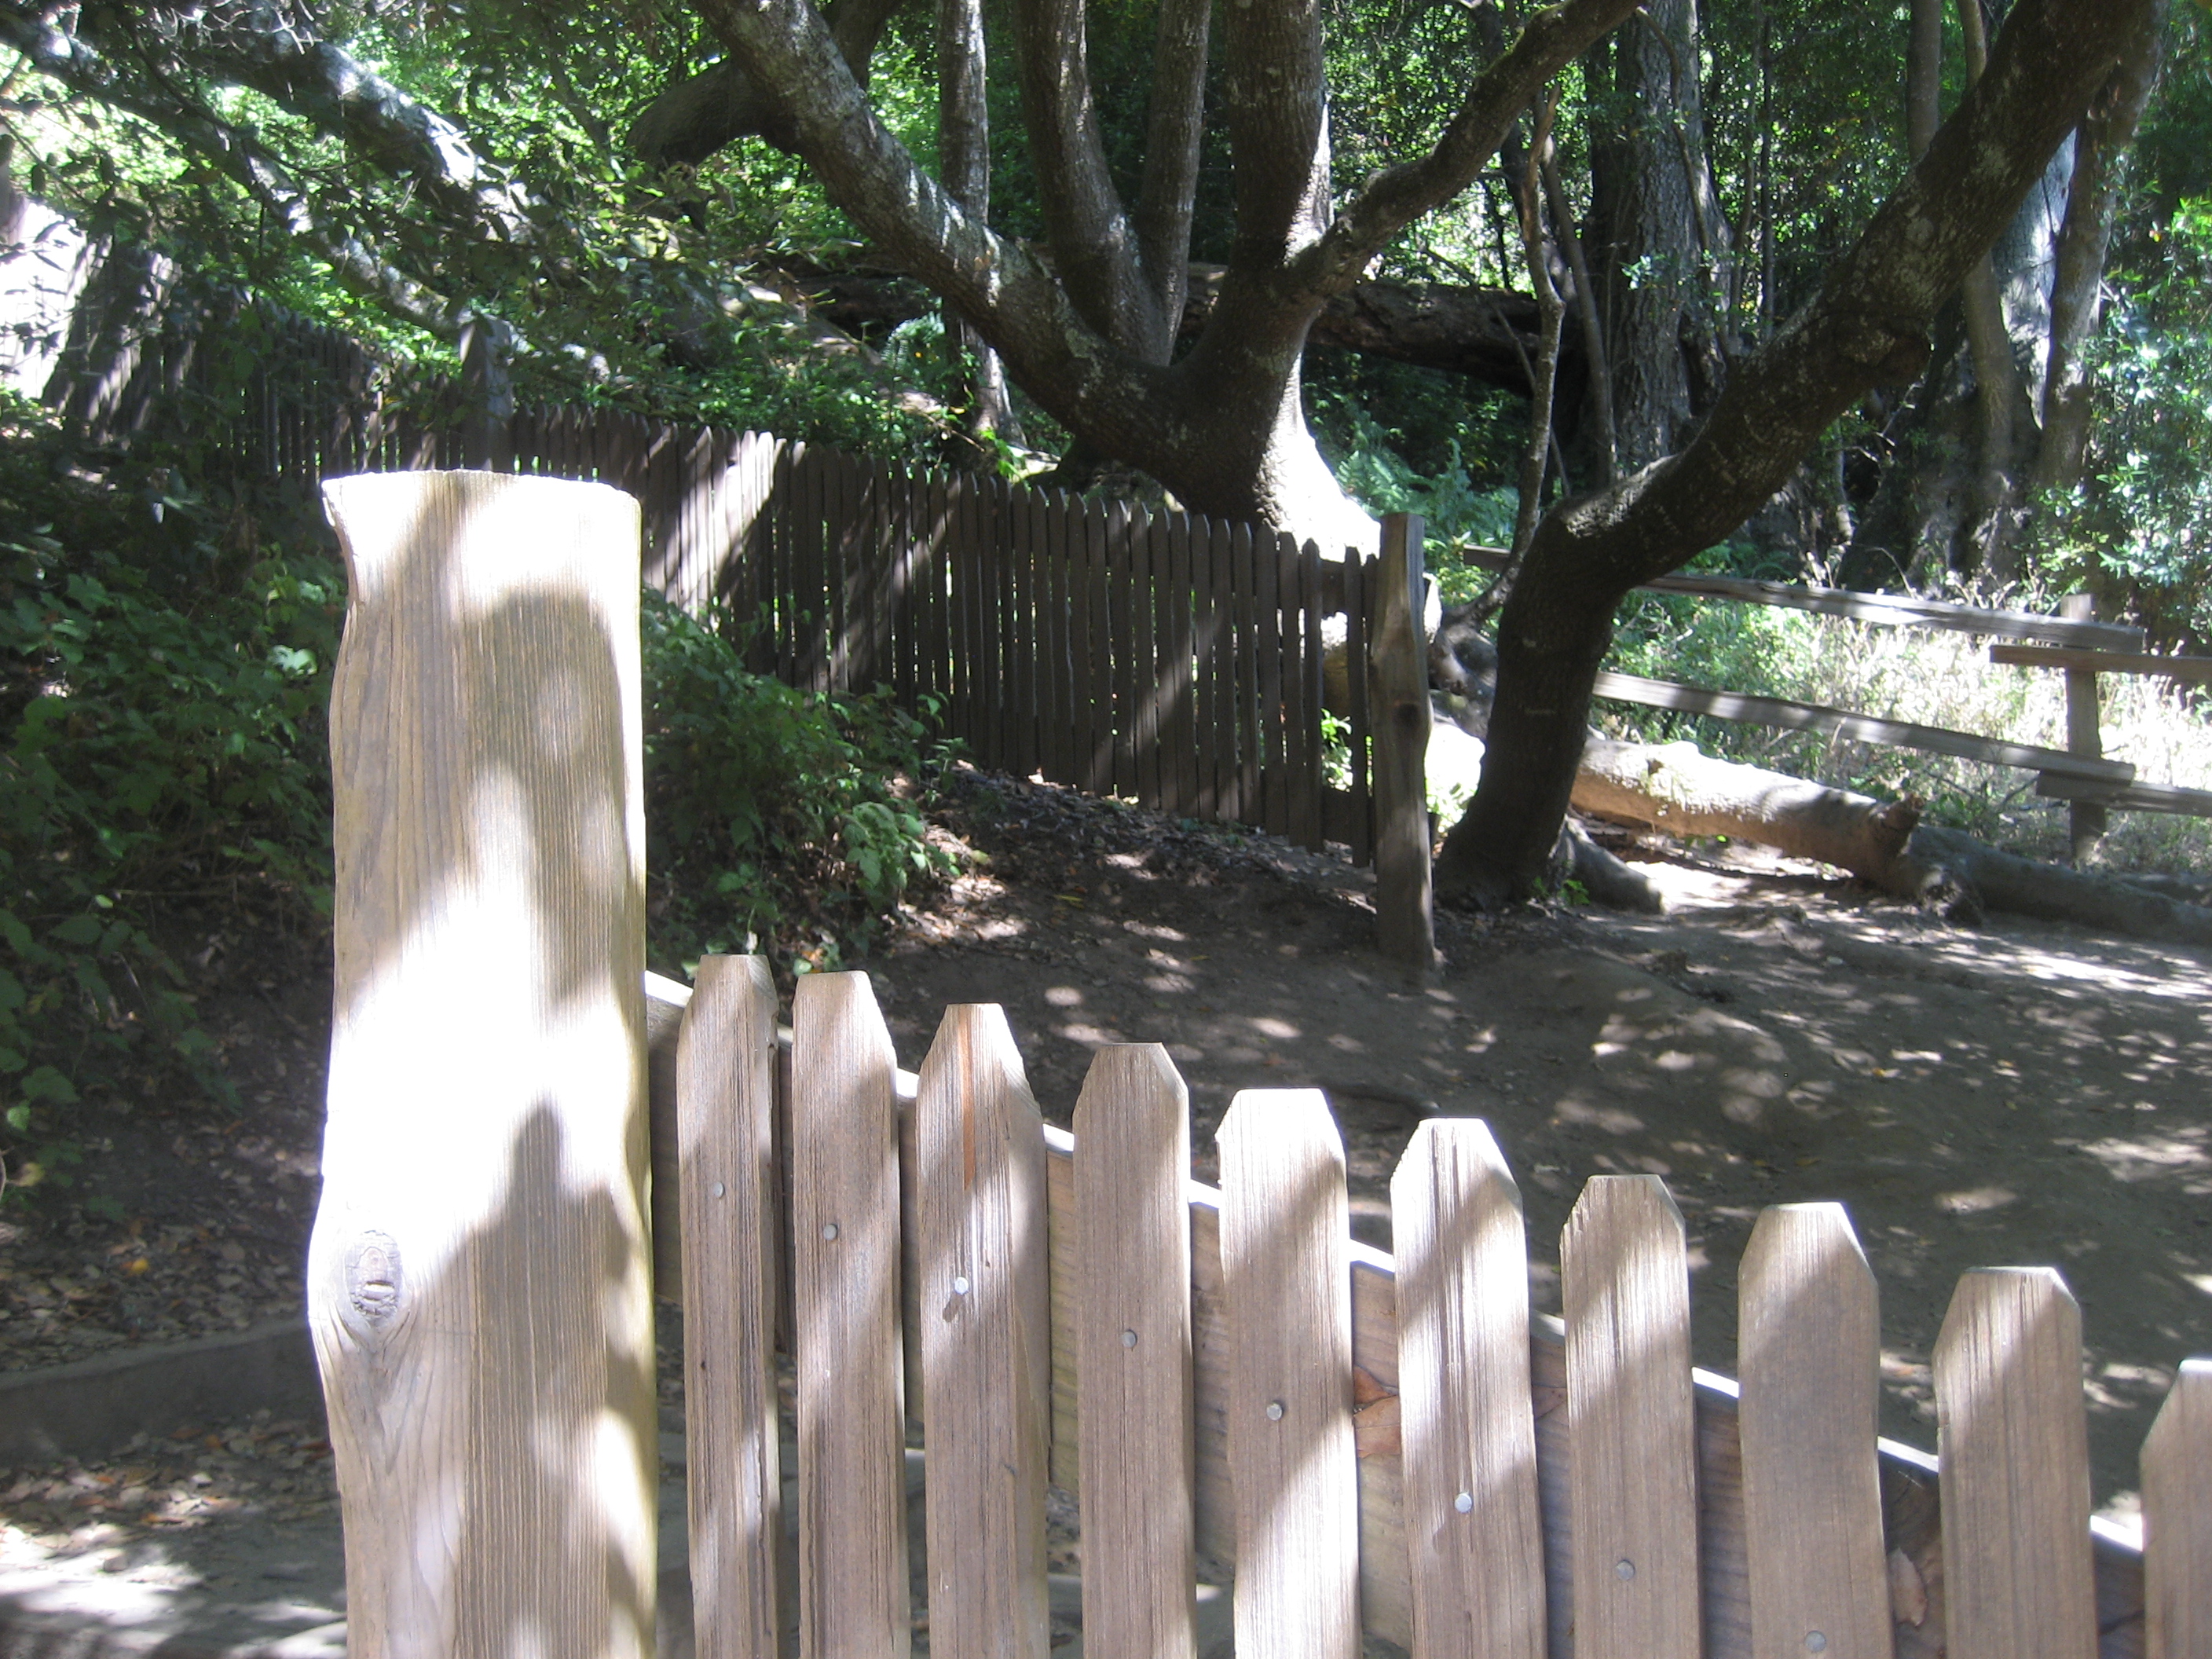 This Bear Valley fence spit and jumped 16 feet apart during the 1906 Earthquake!